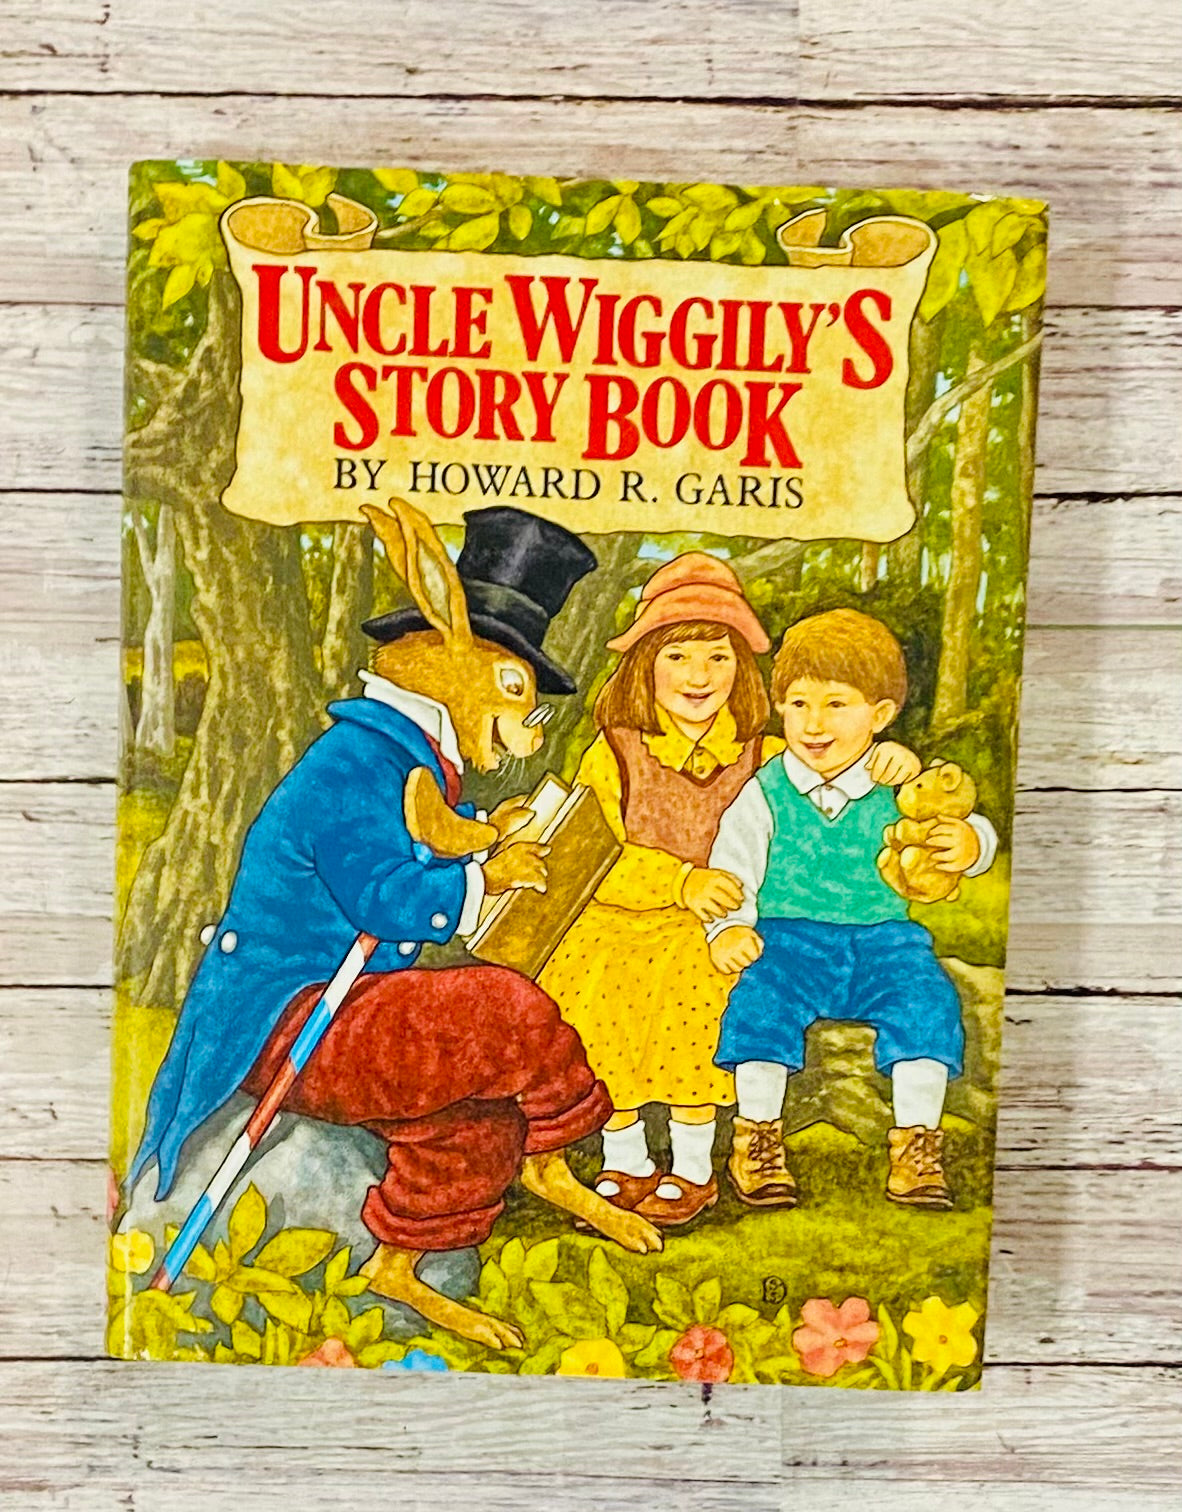 Uncle Wiggily's Story Book - Anchored Homeschool Resource Center